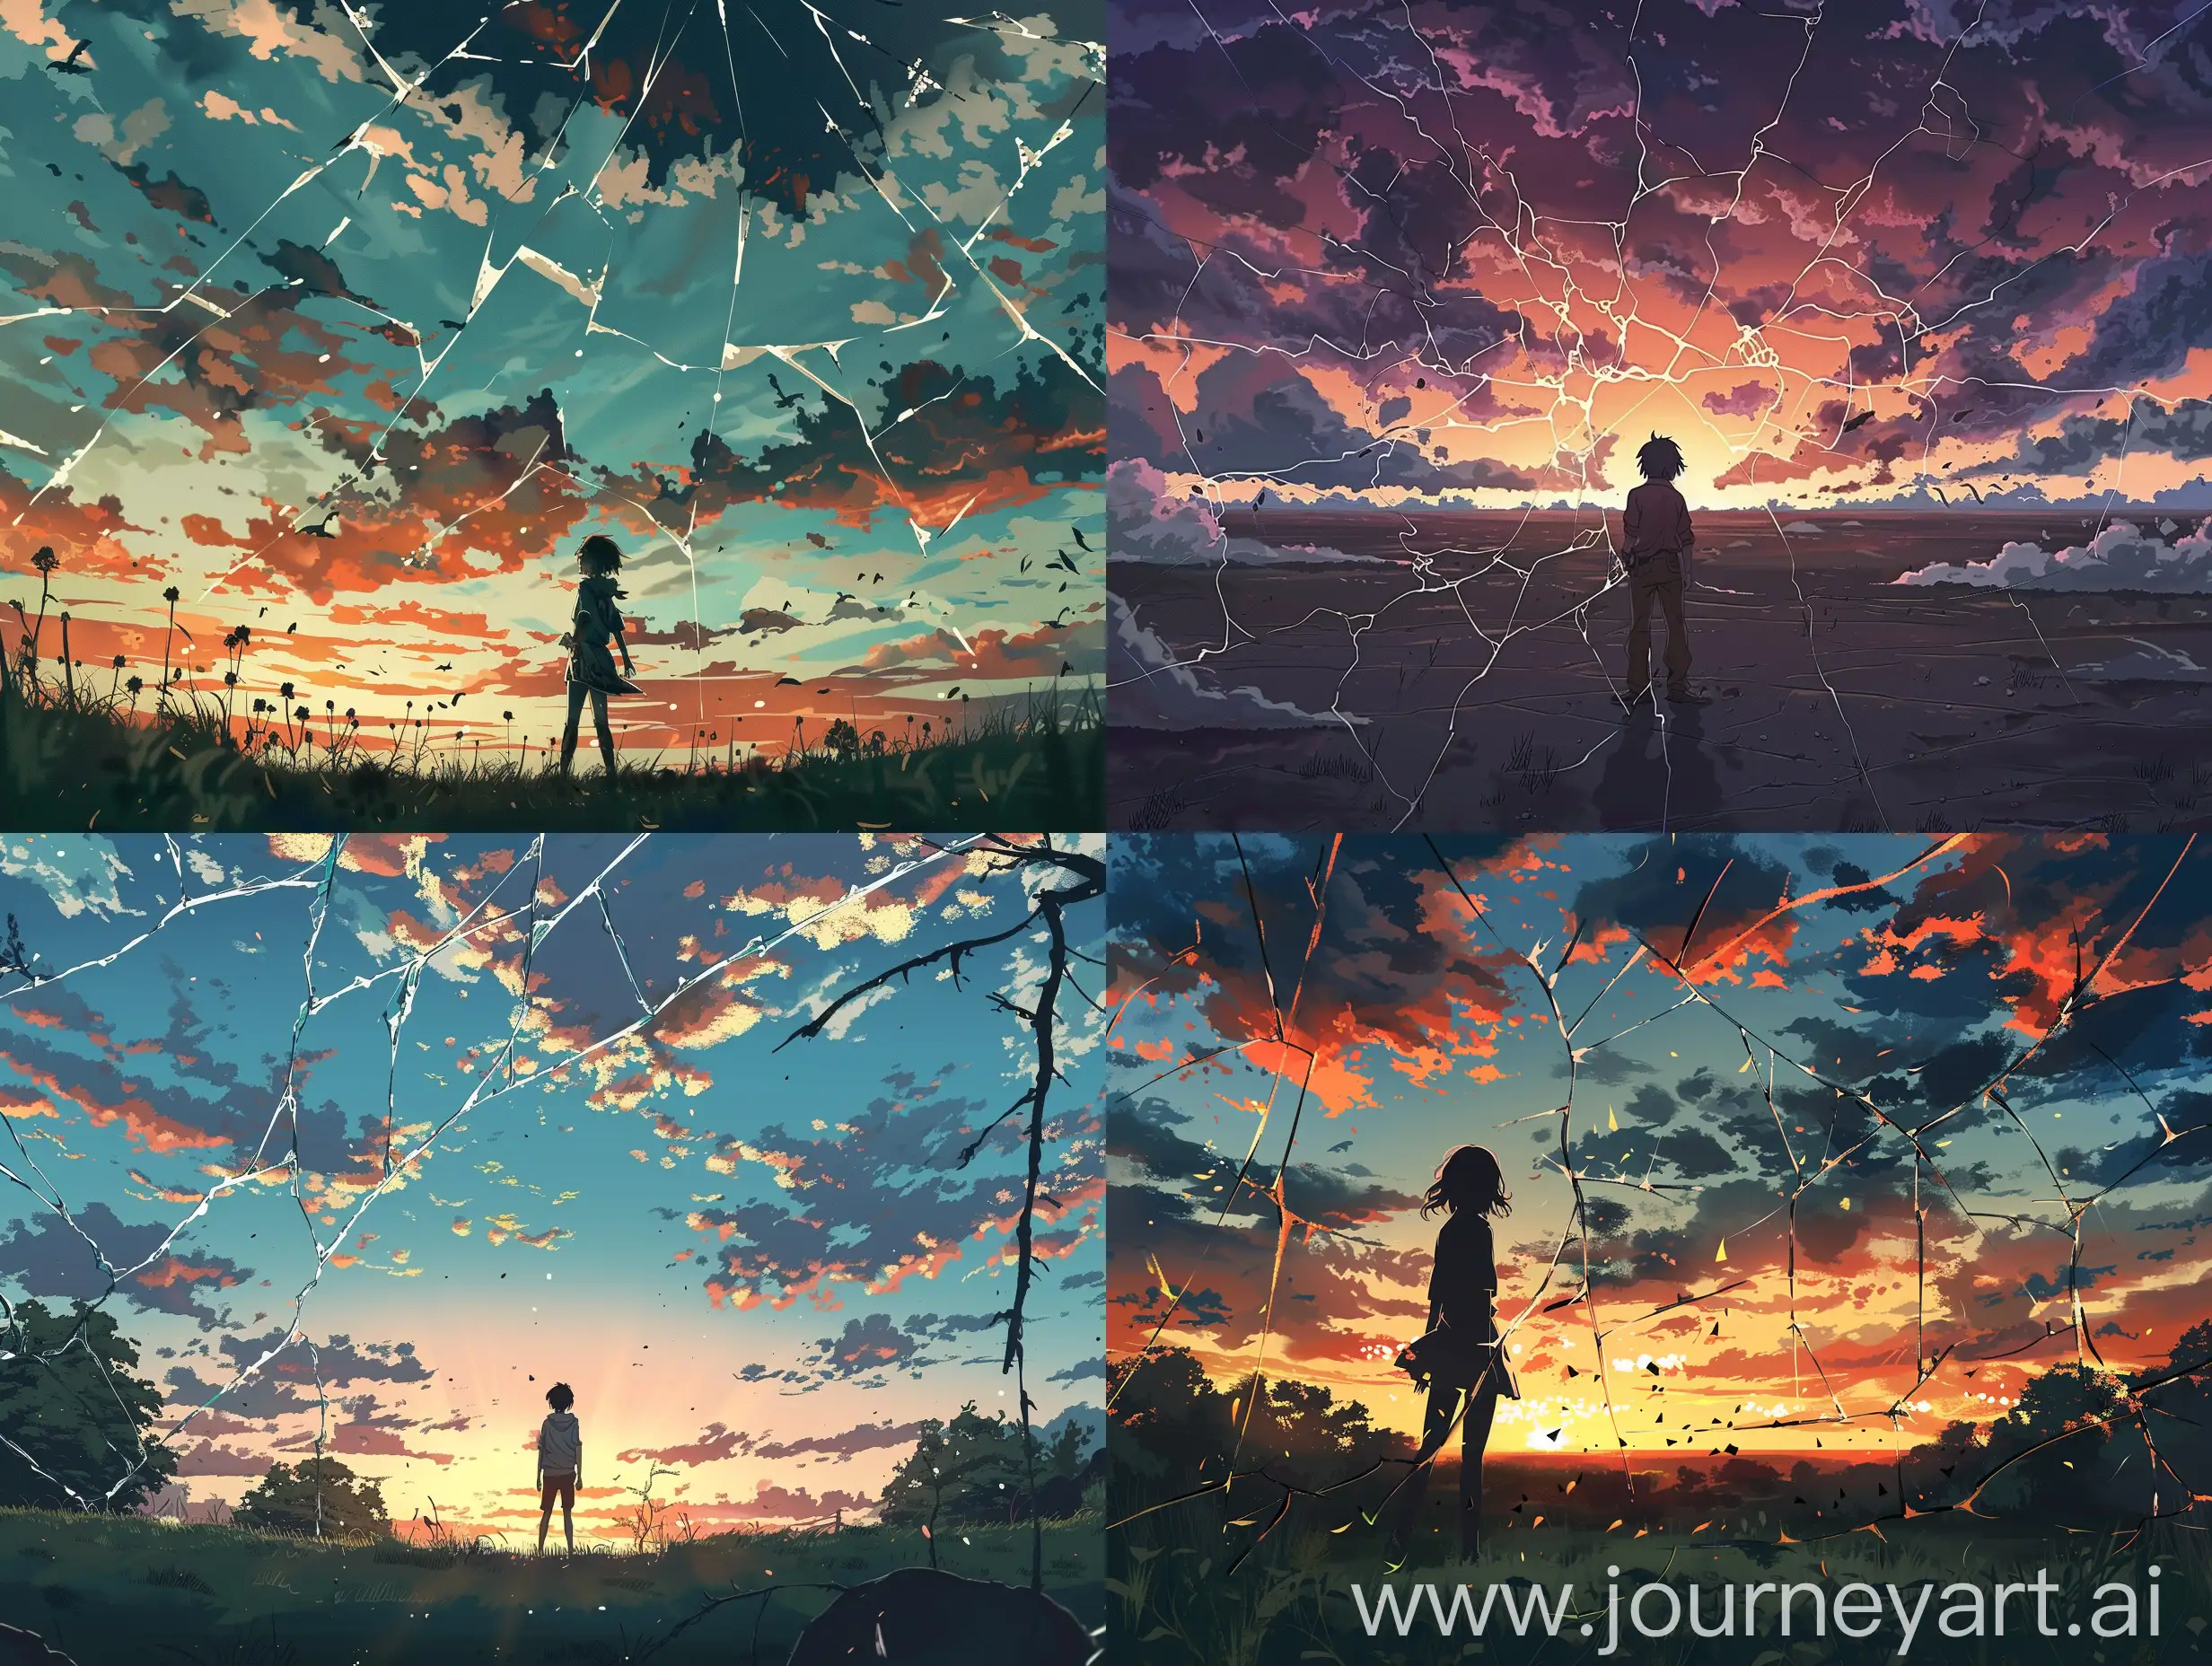 Anime-Style-Awakening-to-Fractured-Sky-and-Unfamiliar-Landscape